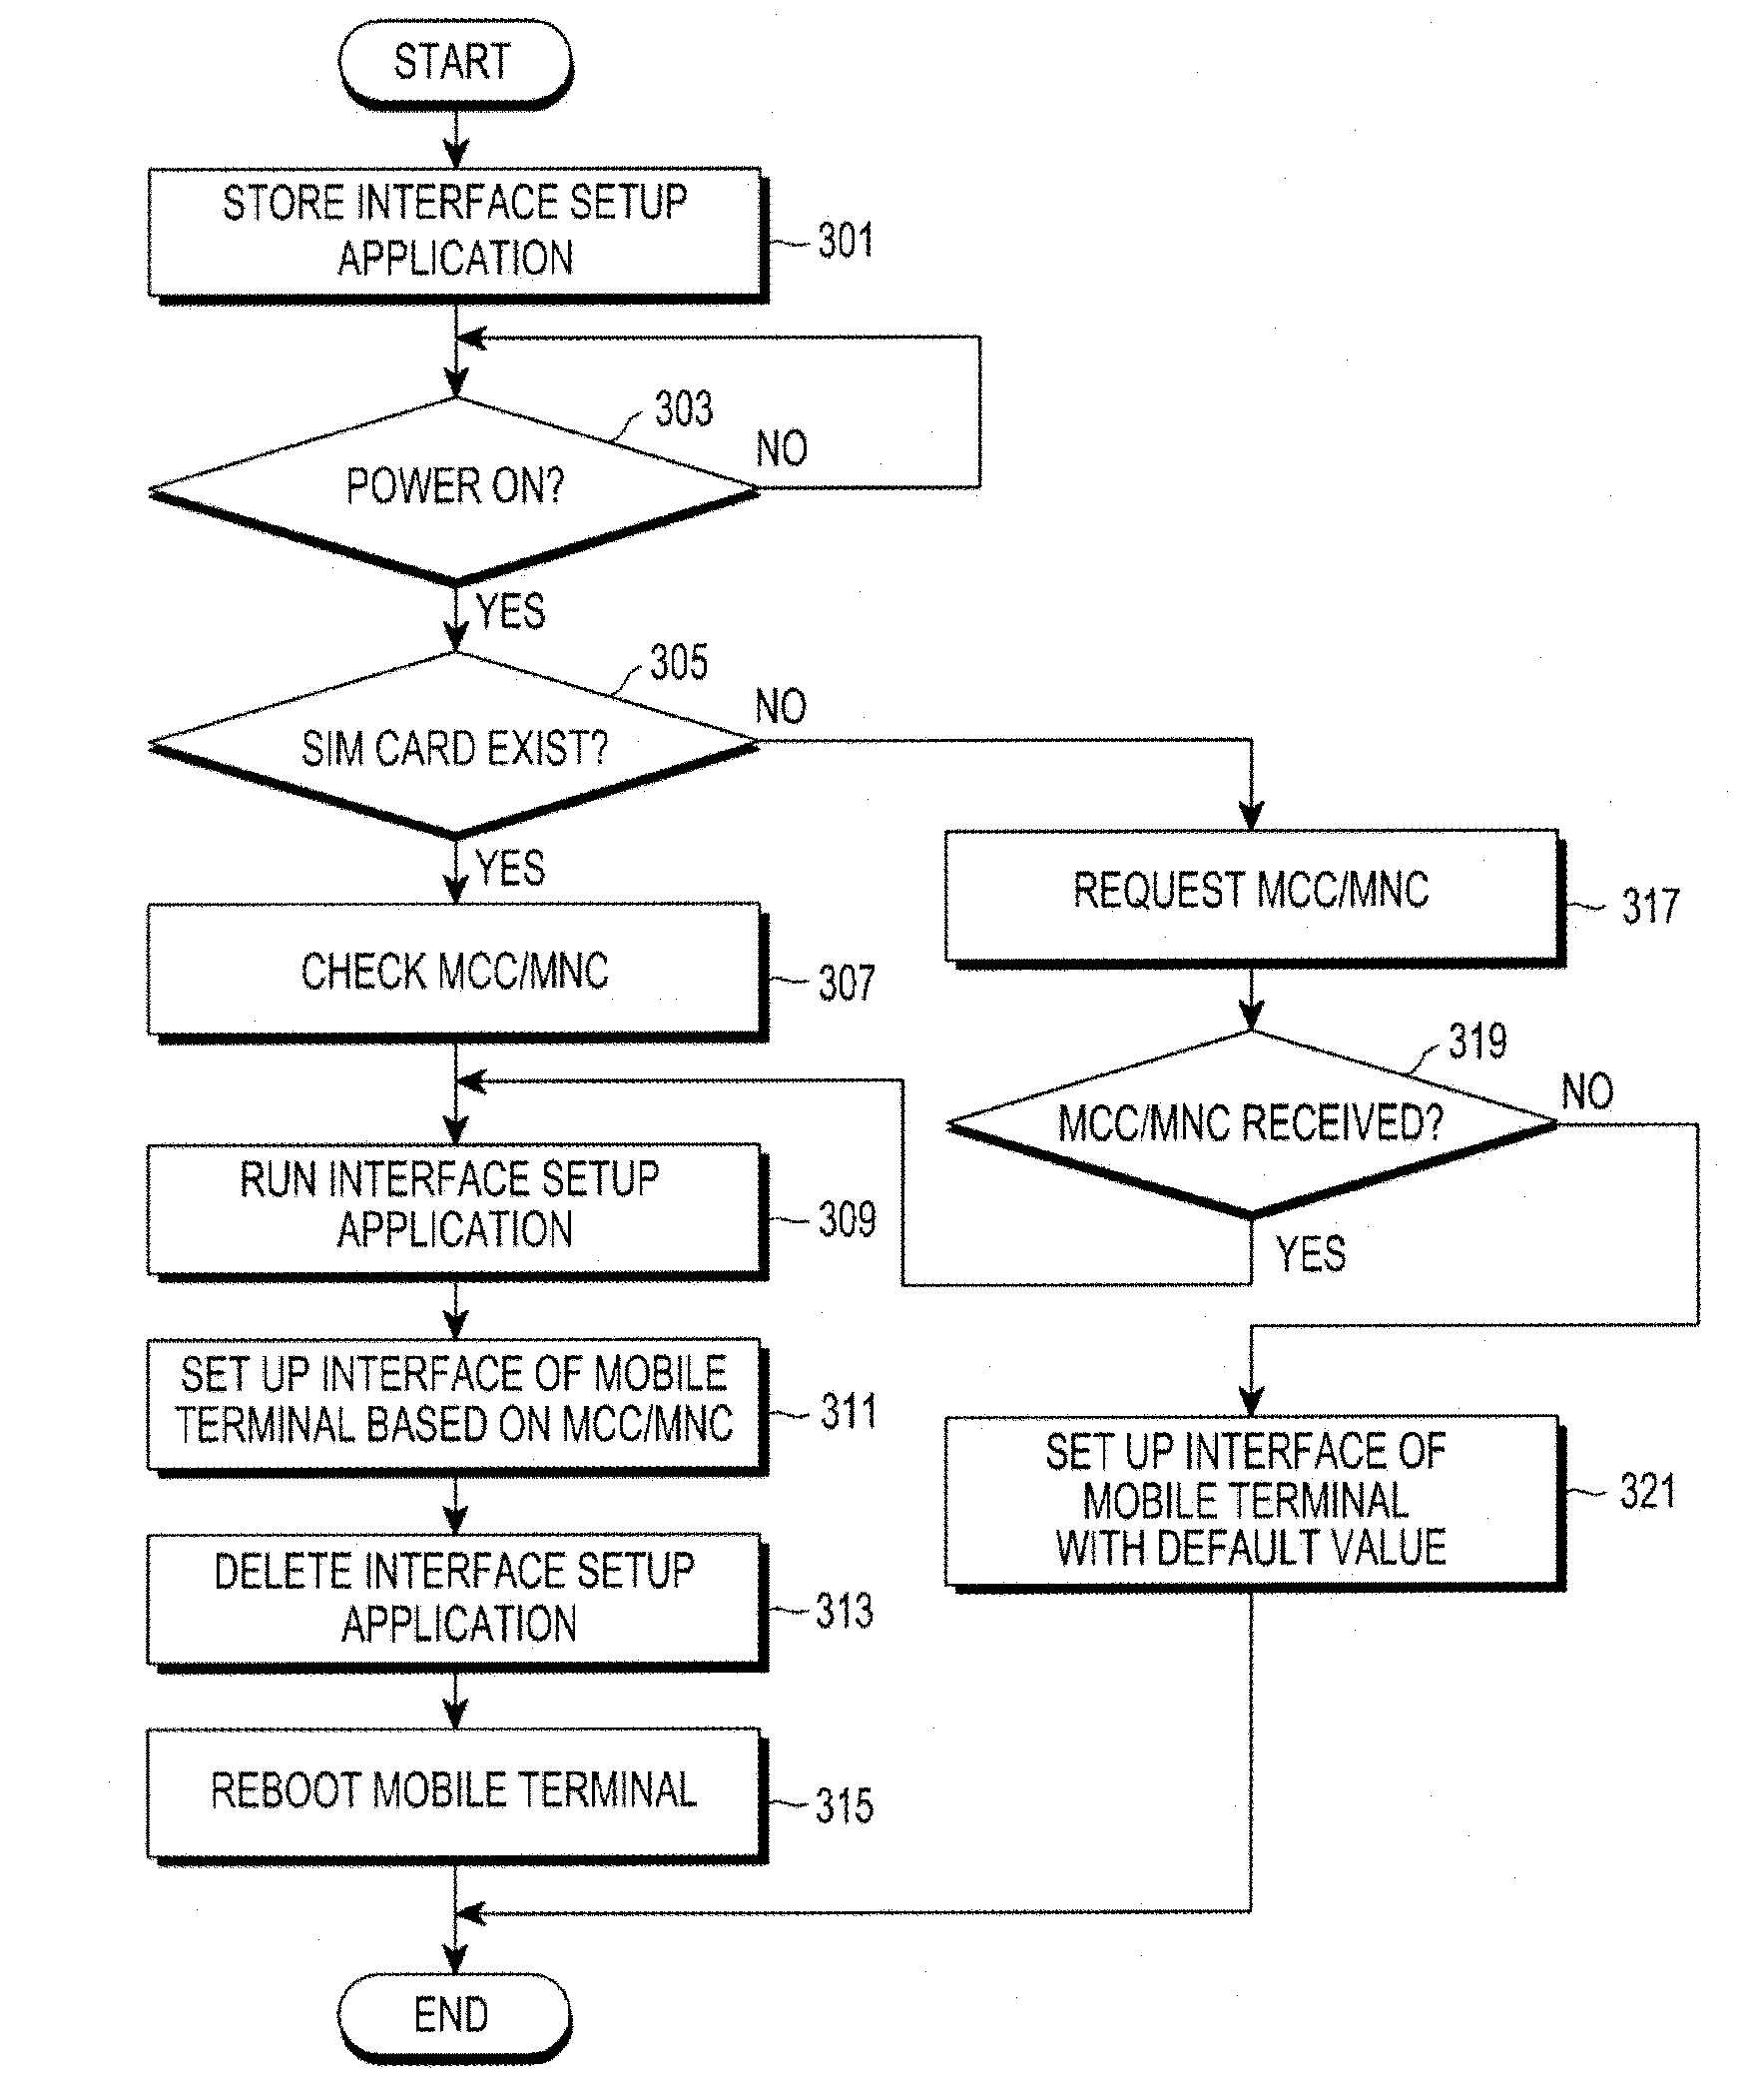 Apparatus and method for setting up an interface in a mobile terminal